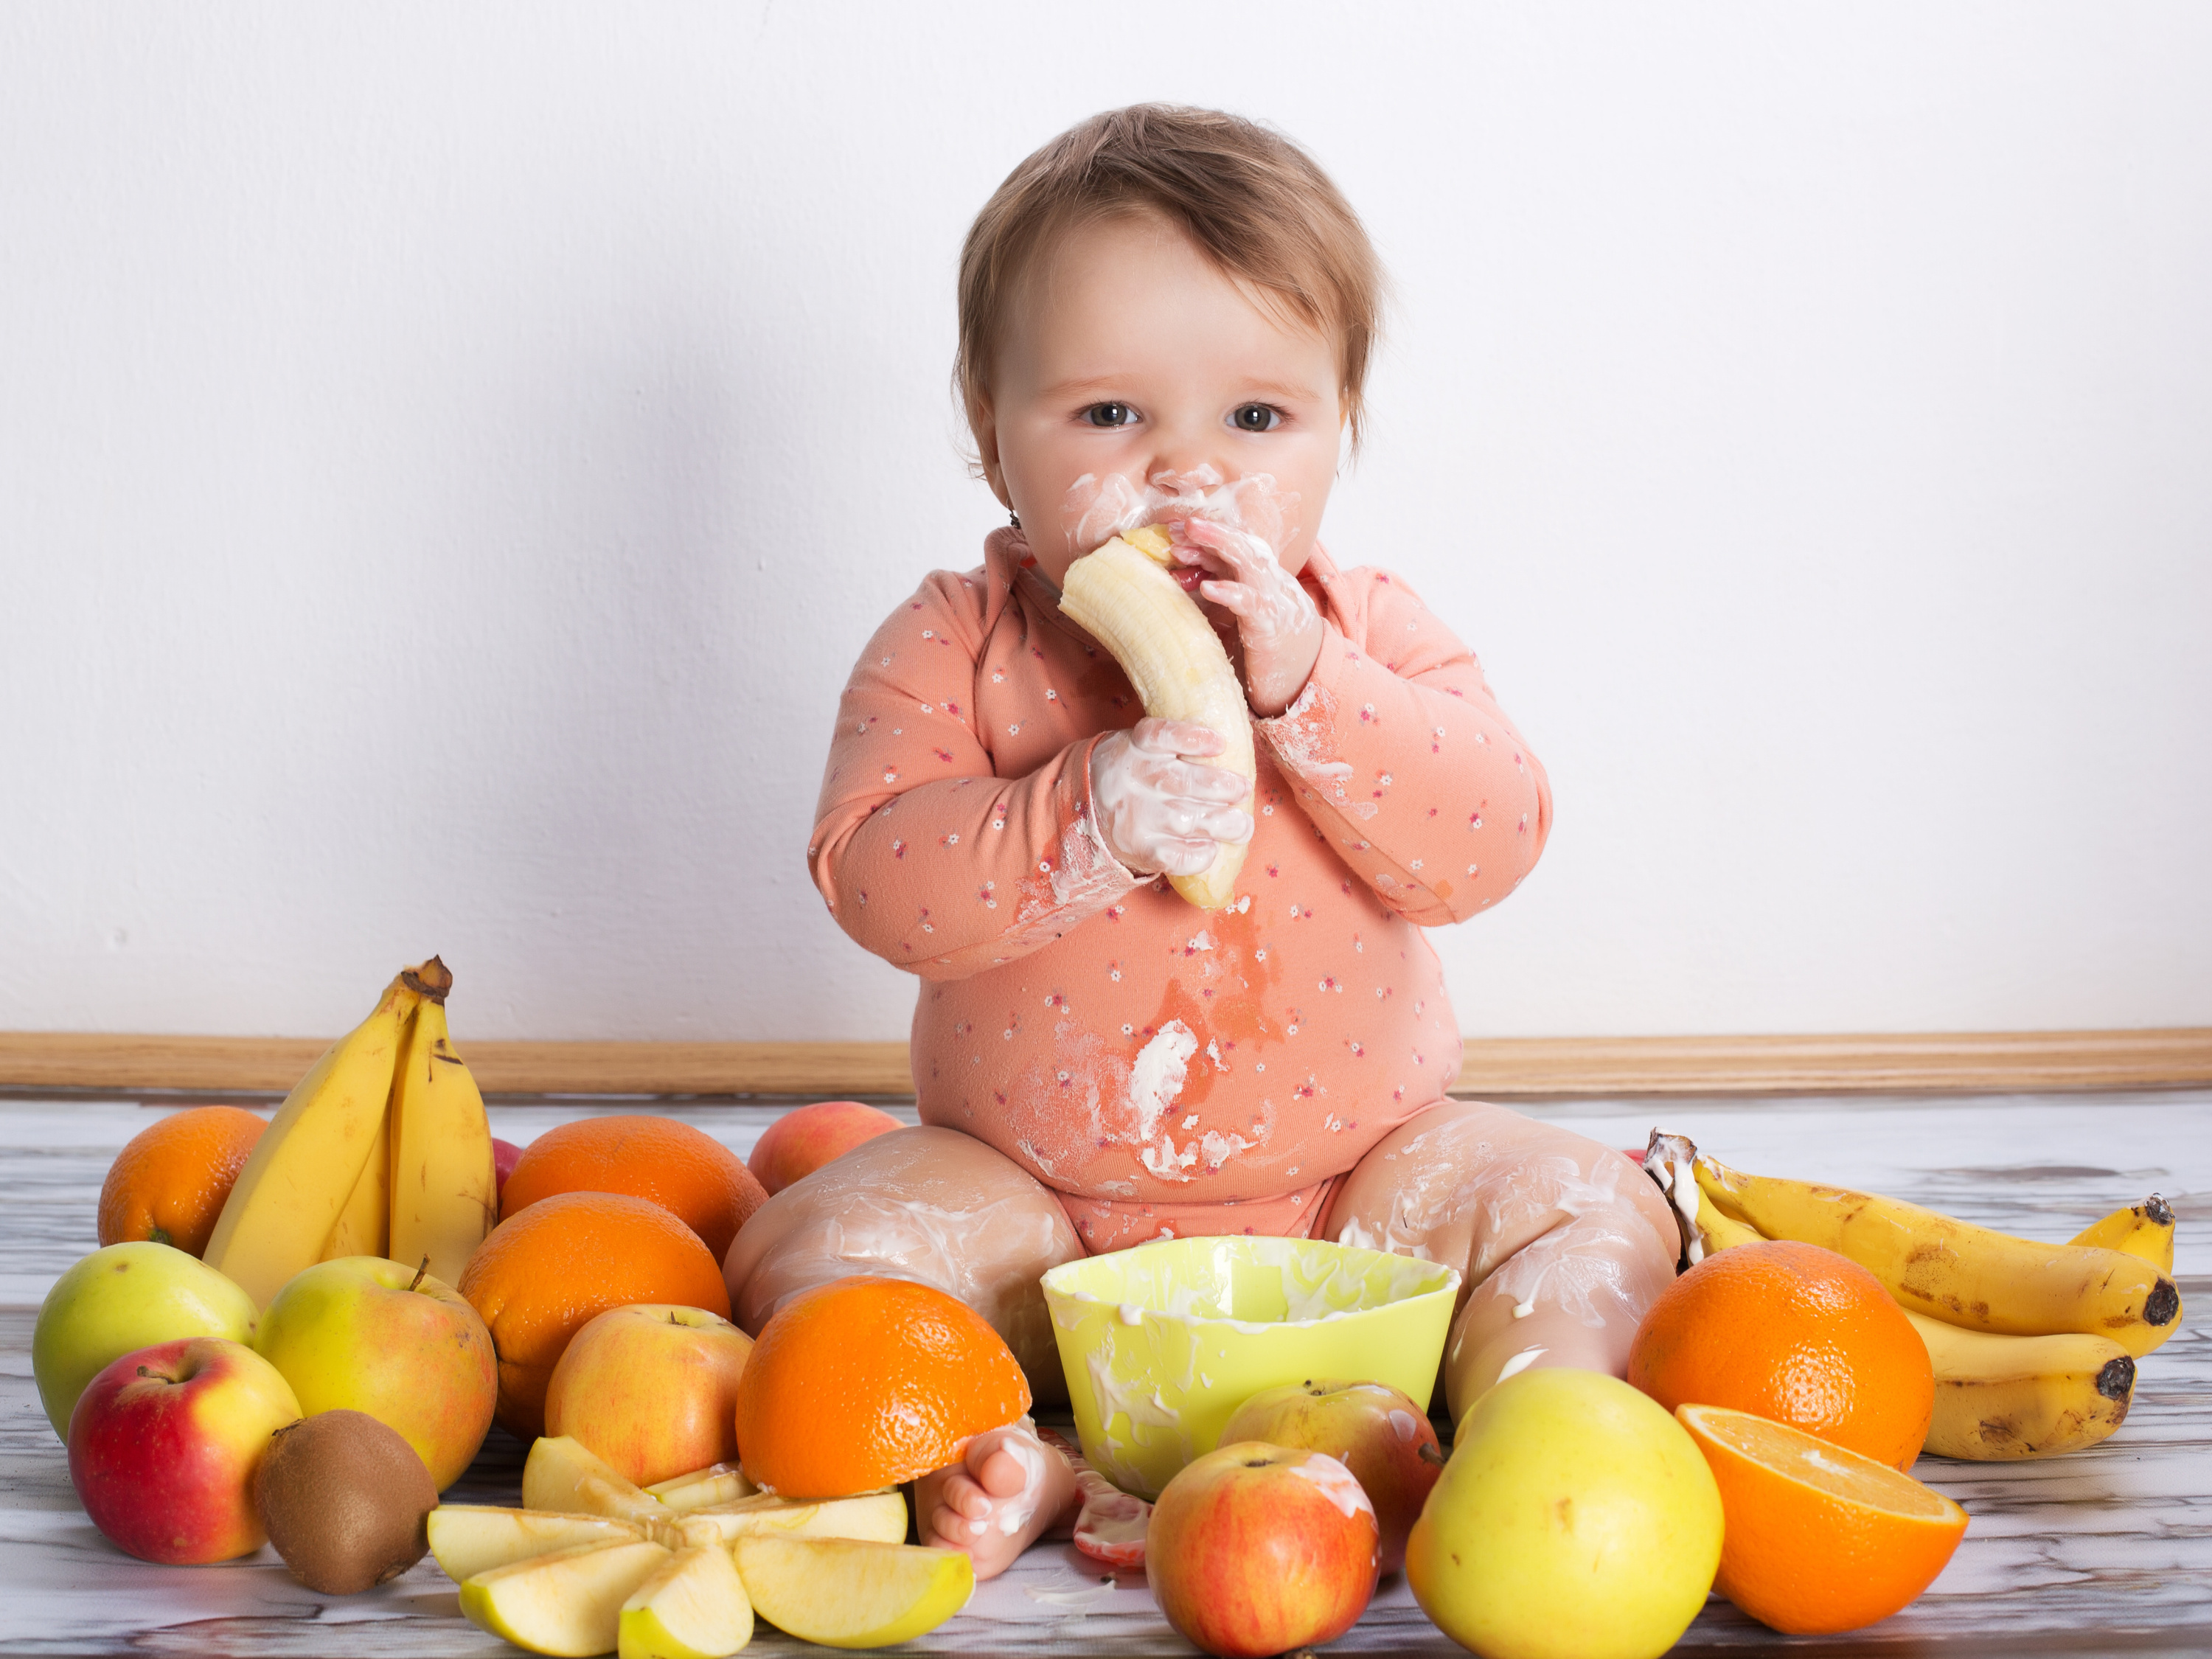 Baby eating fruits